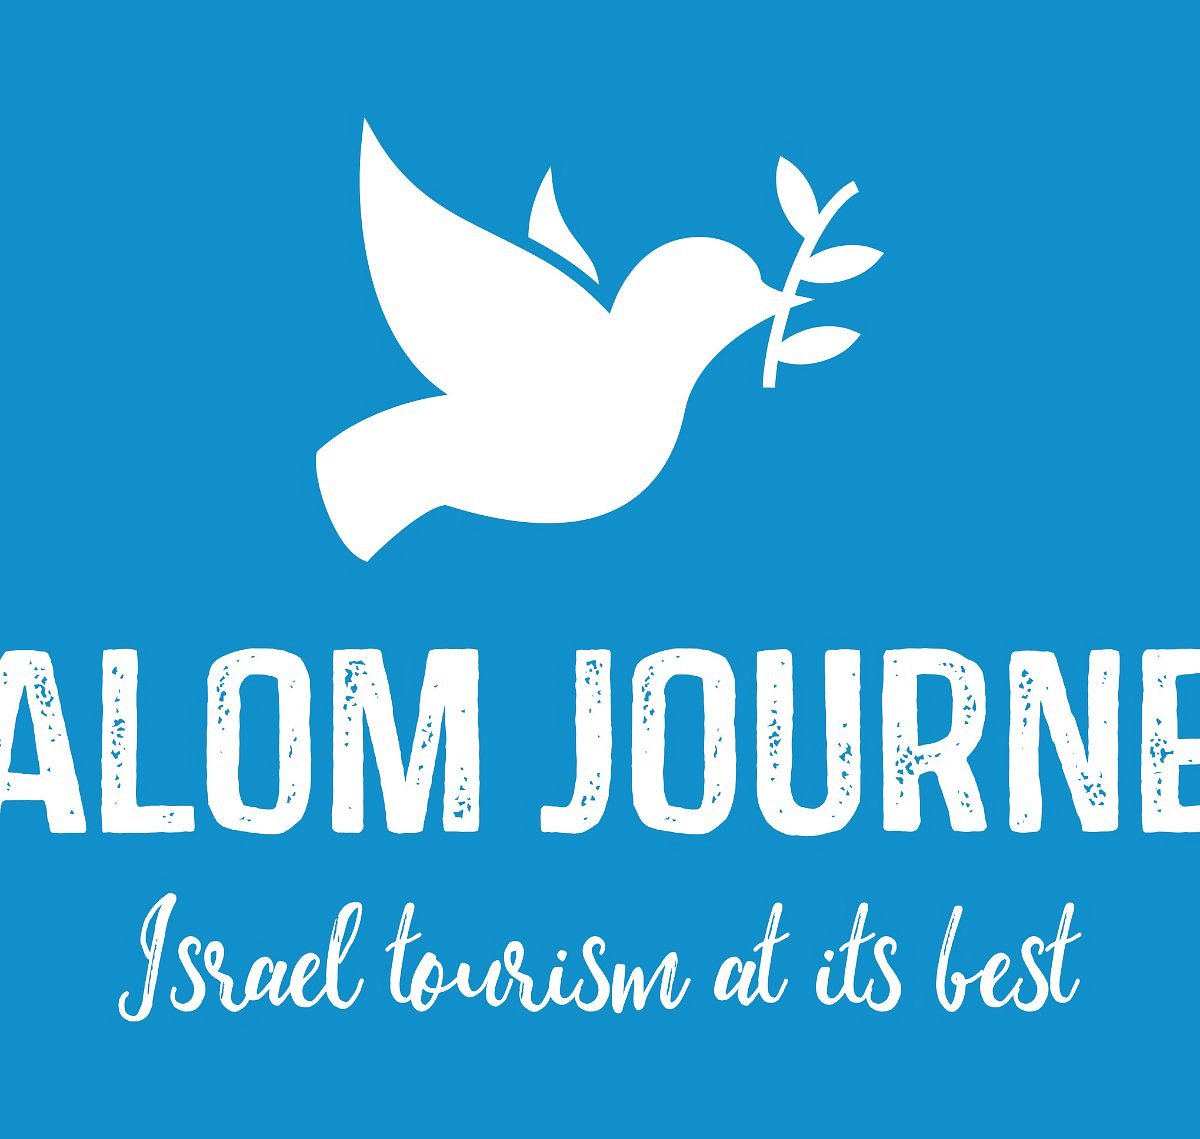 Shalom Israel Tours Reviews  Read Customer Service Reviews of  shalomisraeltours.com